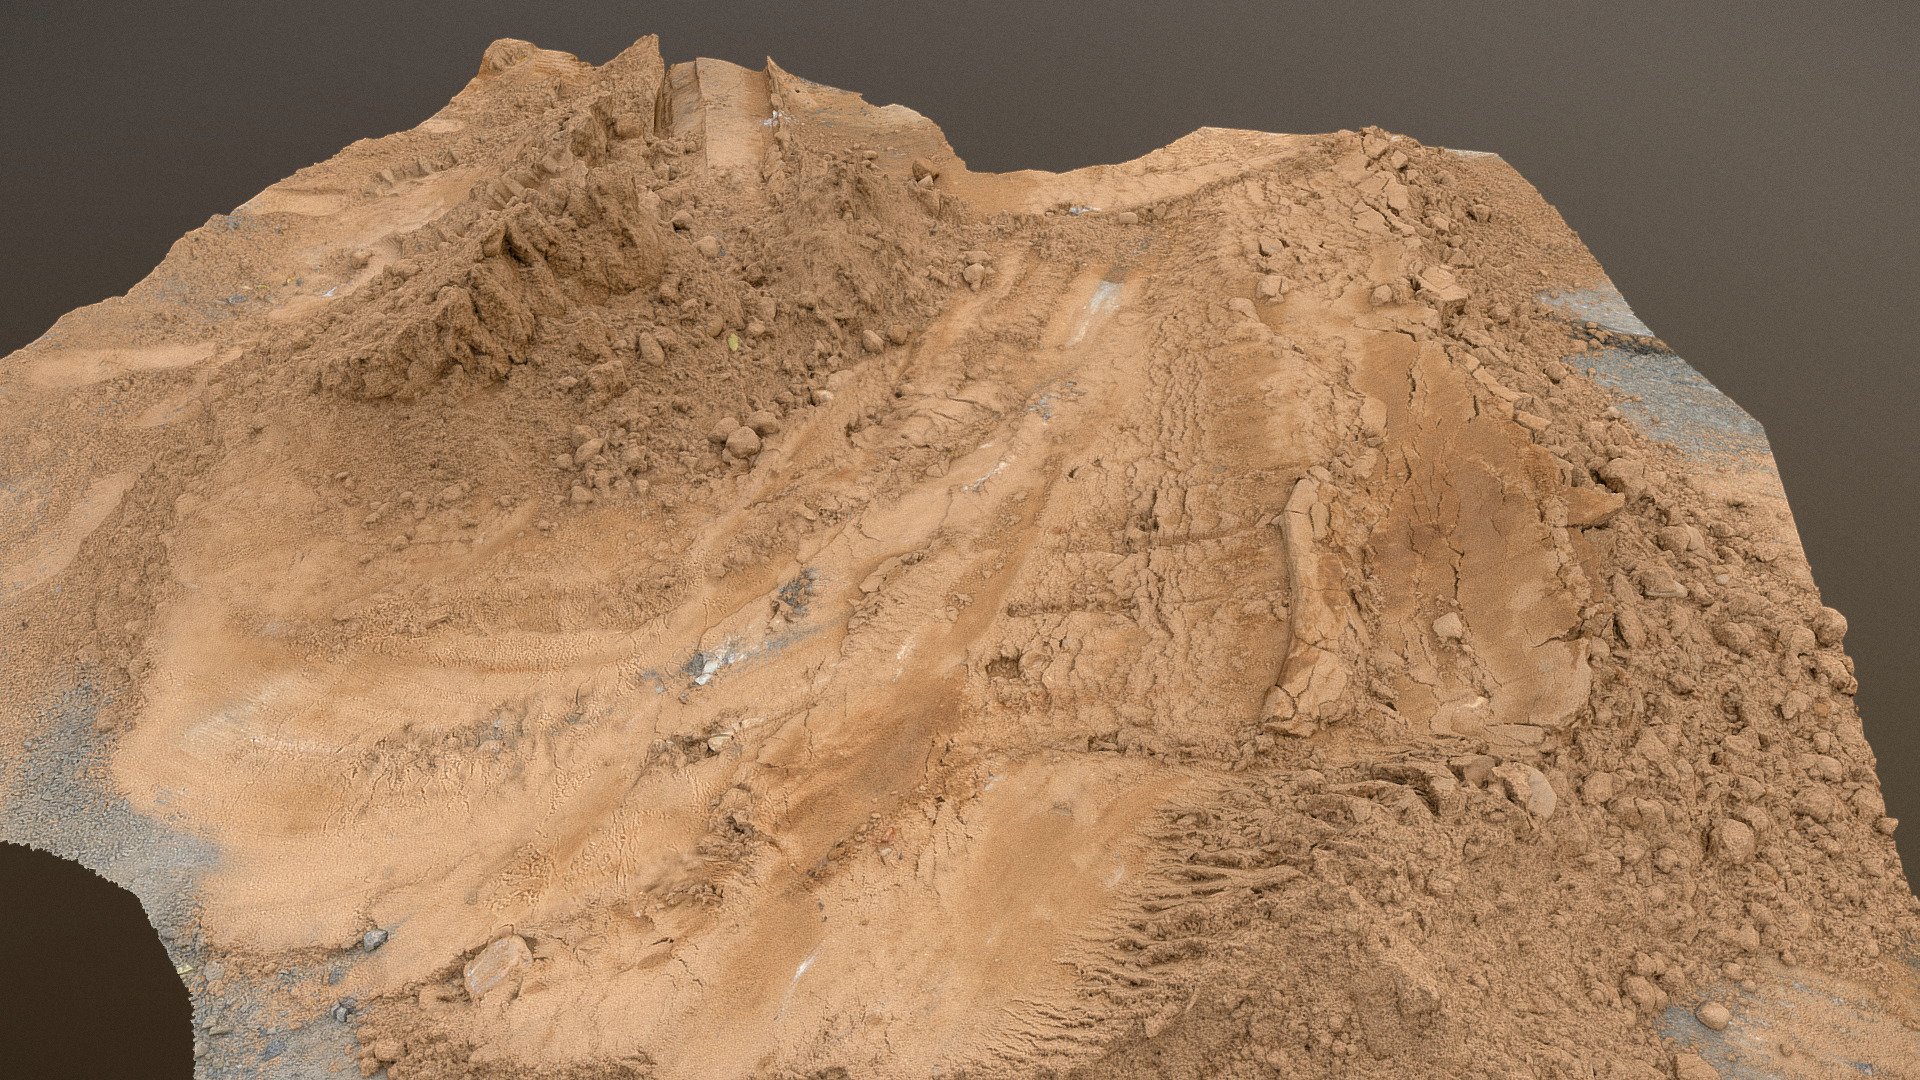 Construction site sand track trail heap pile field truck vehicle tyre tracks ground poured material

photogrammetry scan (150x24mp), 3x16k textures + normals from 3m tris - Construction site sand track - Buy Royalty Free 3D model by matousekfoto 3d model